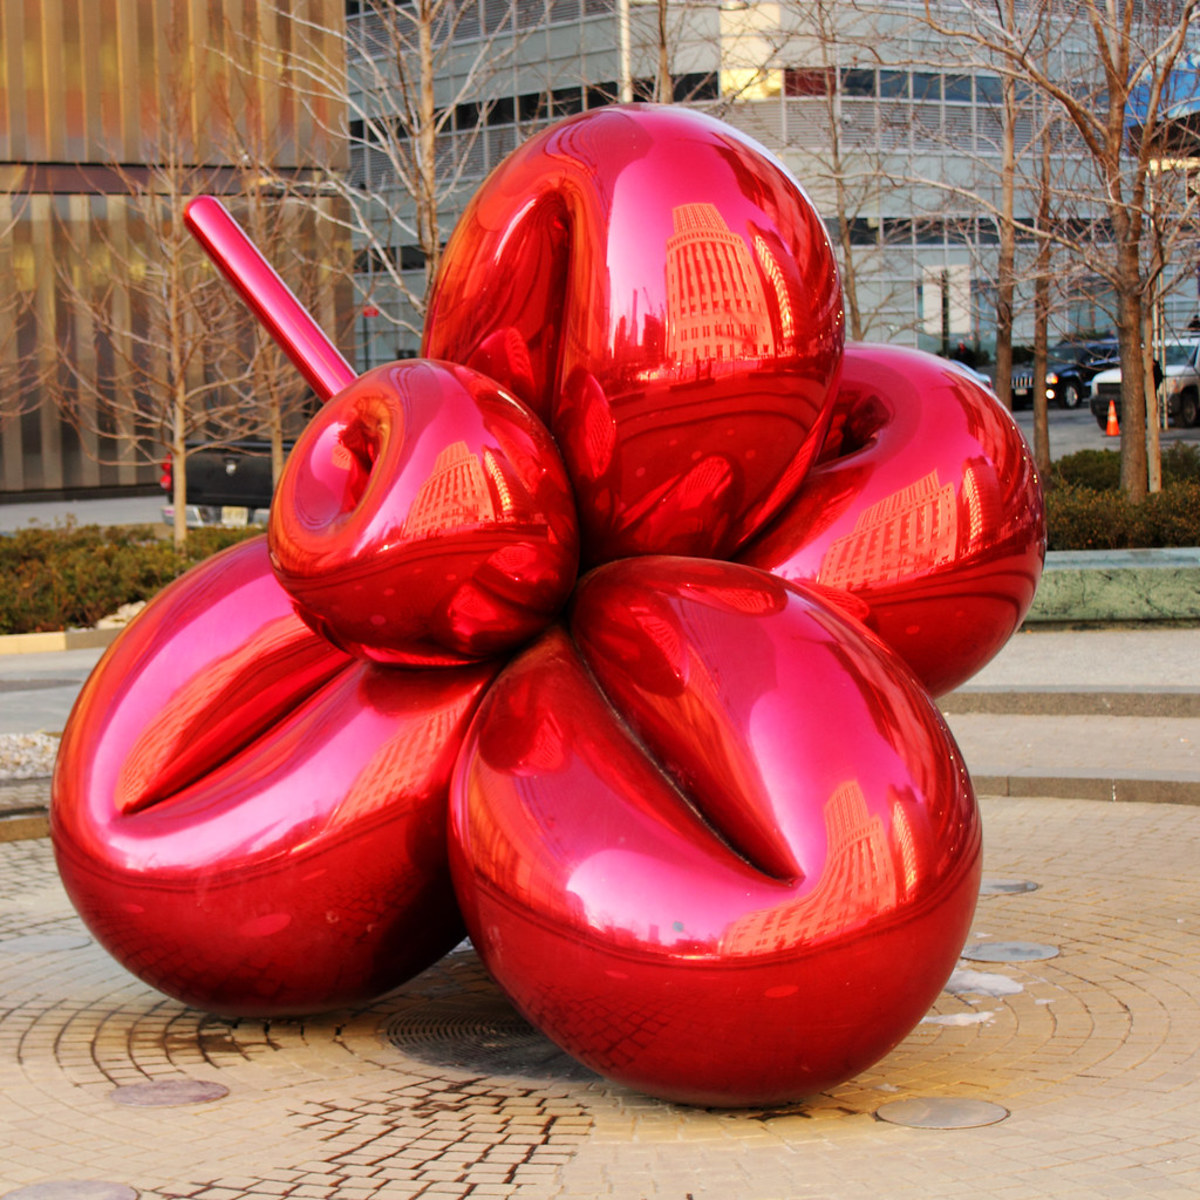 This balloon sculpture is actually made of steel.